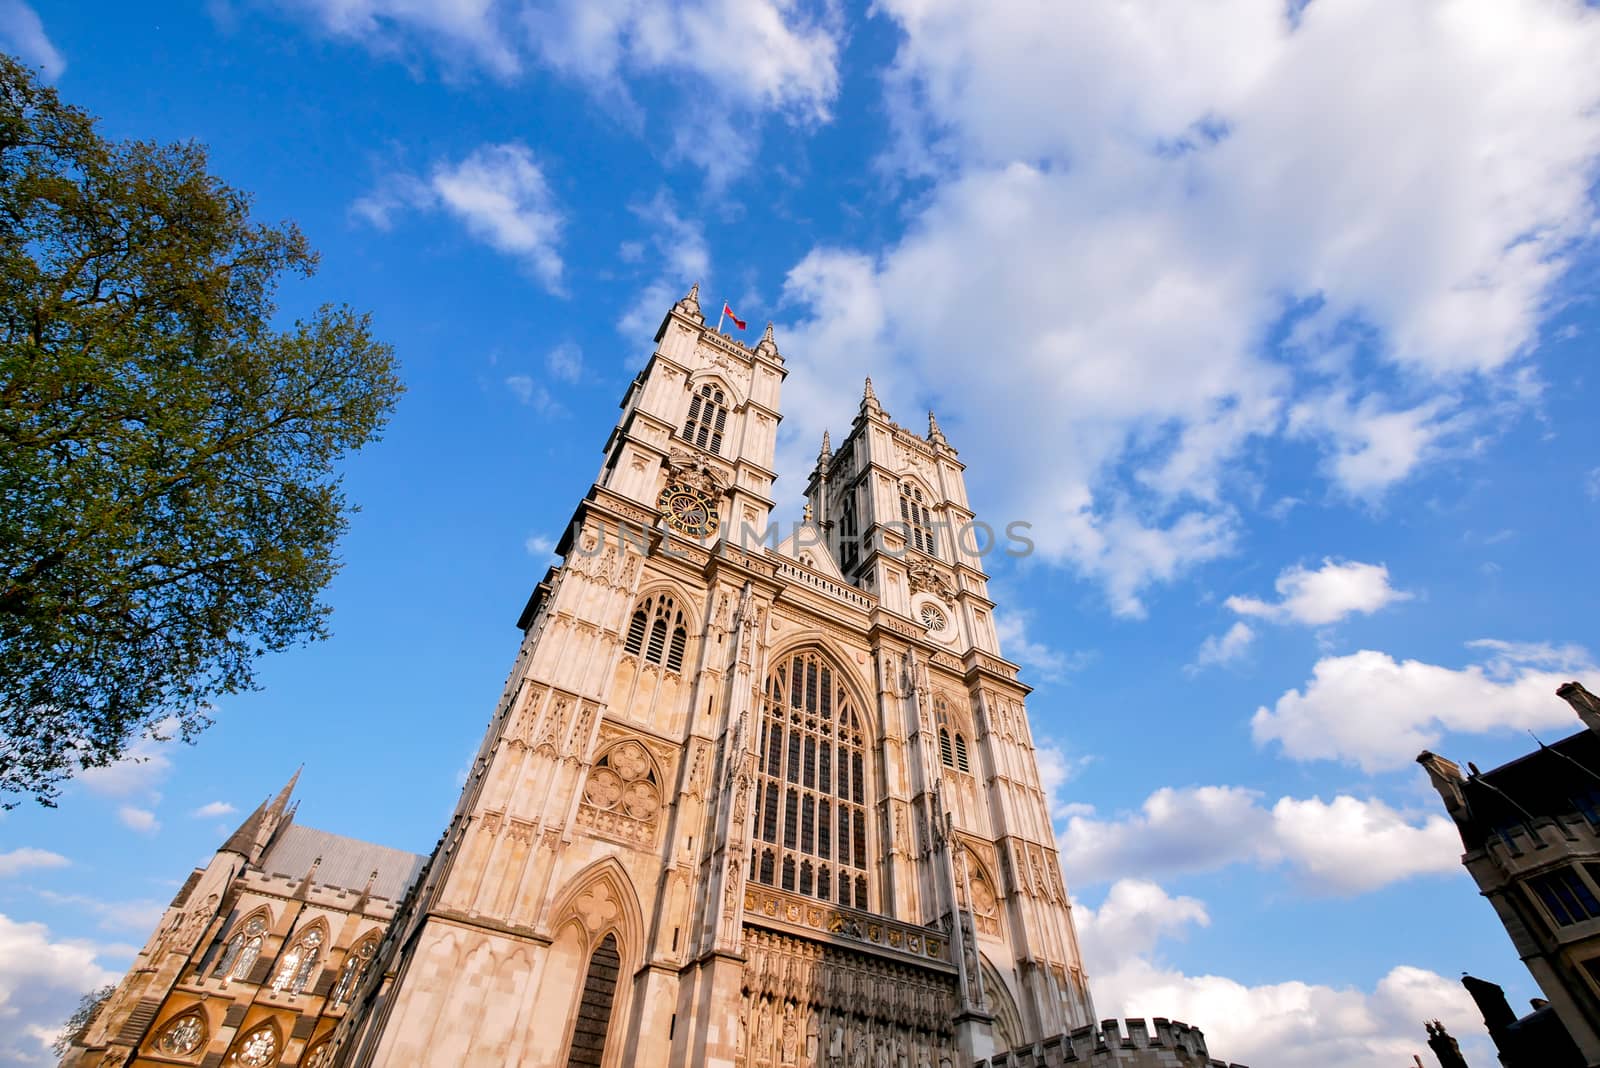 Westminster abbey London, UK by Alicephoto